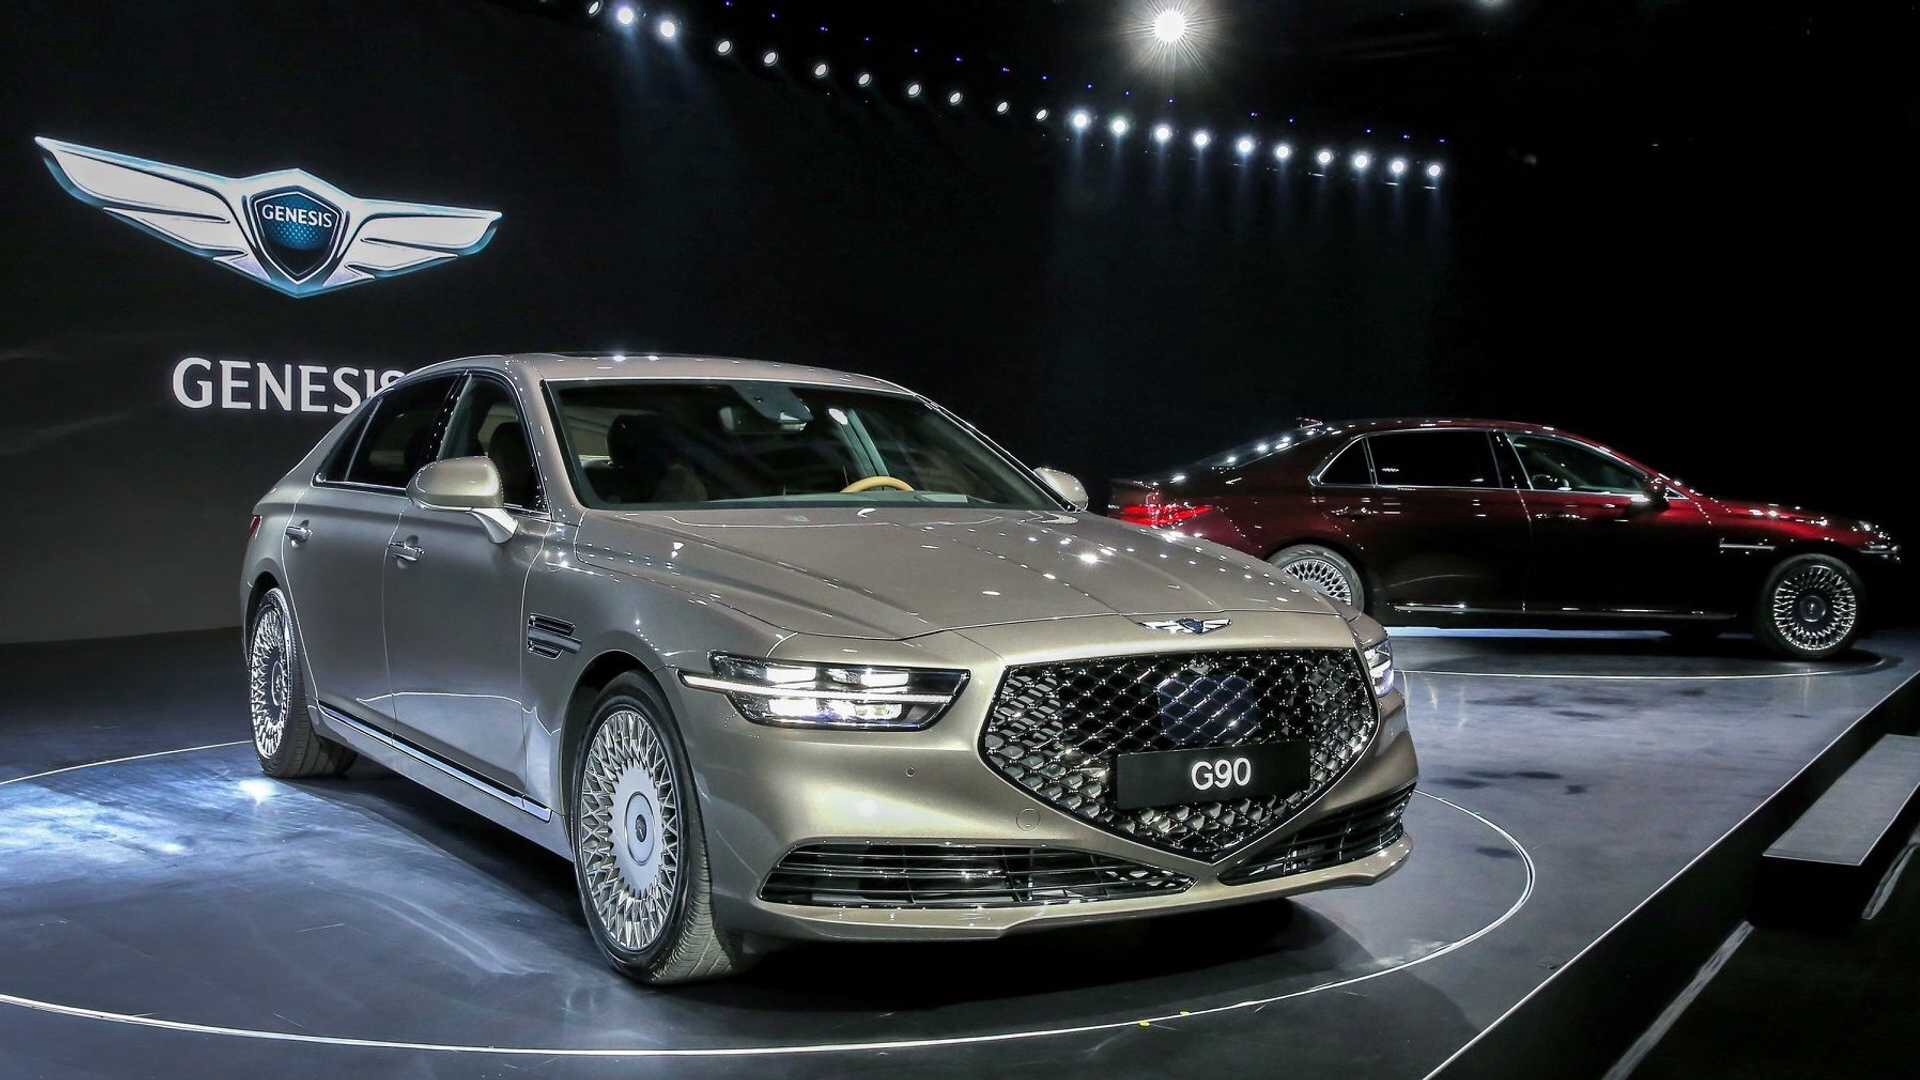 2020 Genesis G90 Unveiled With Massive Design Changes